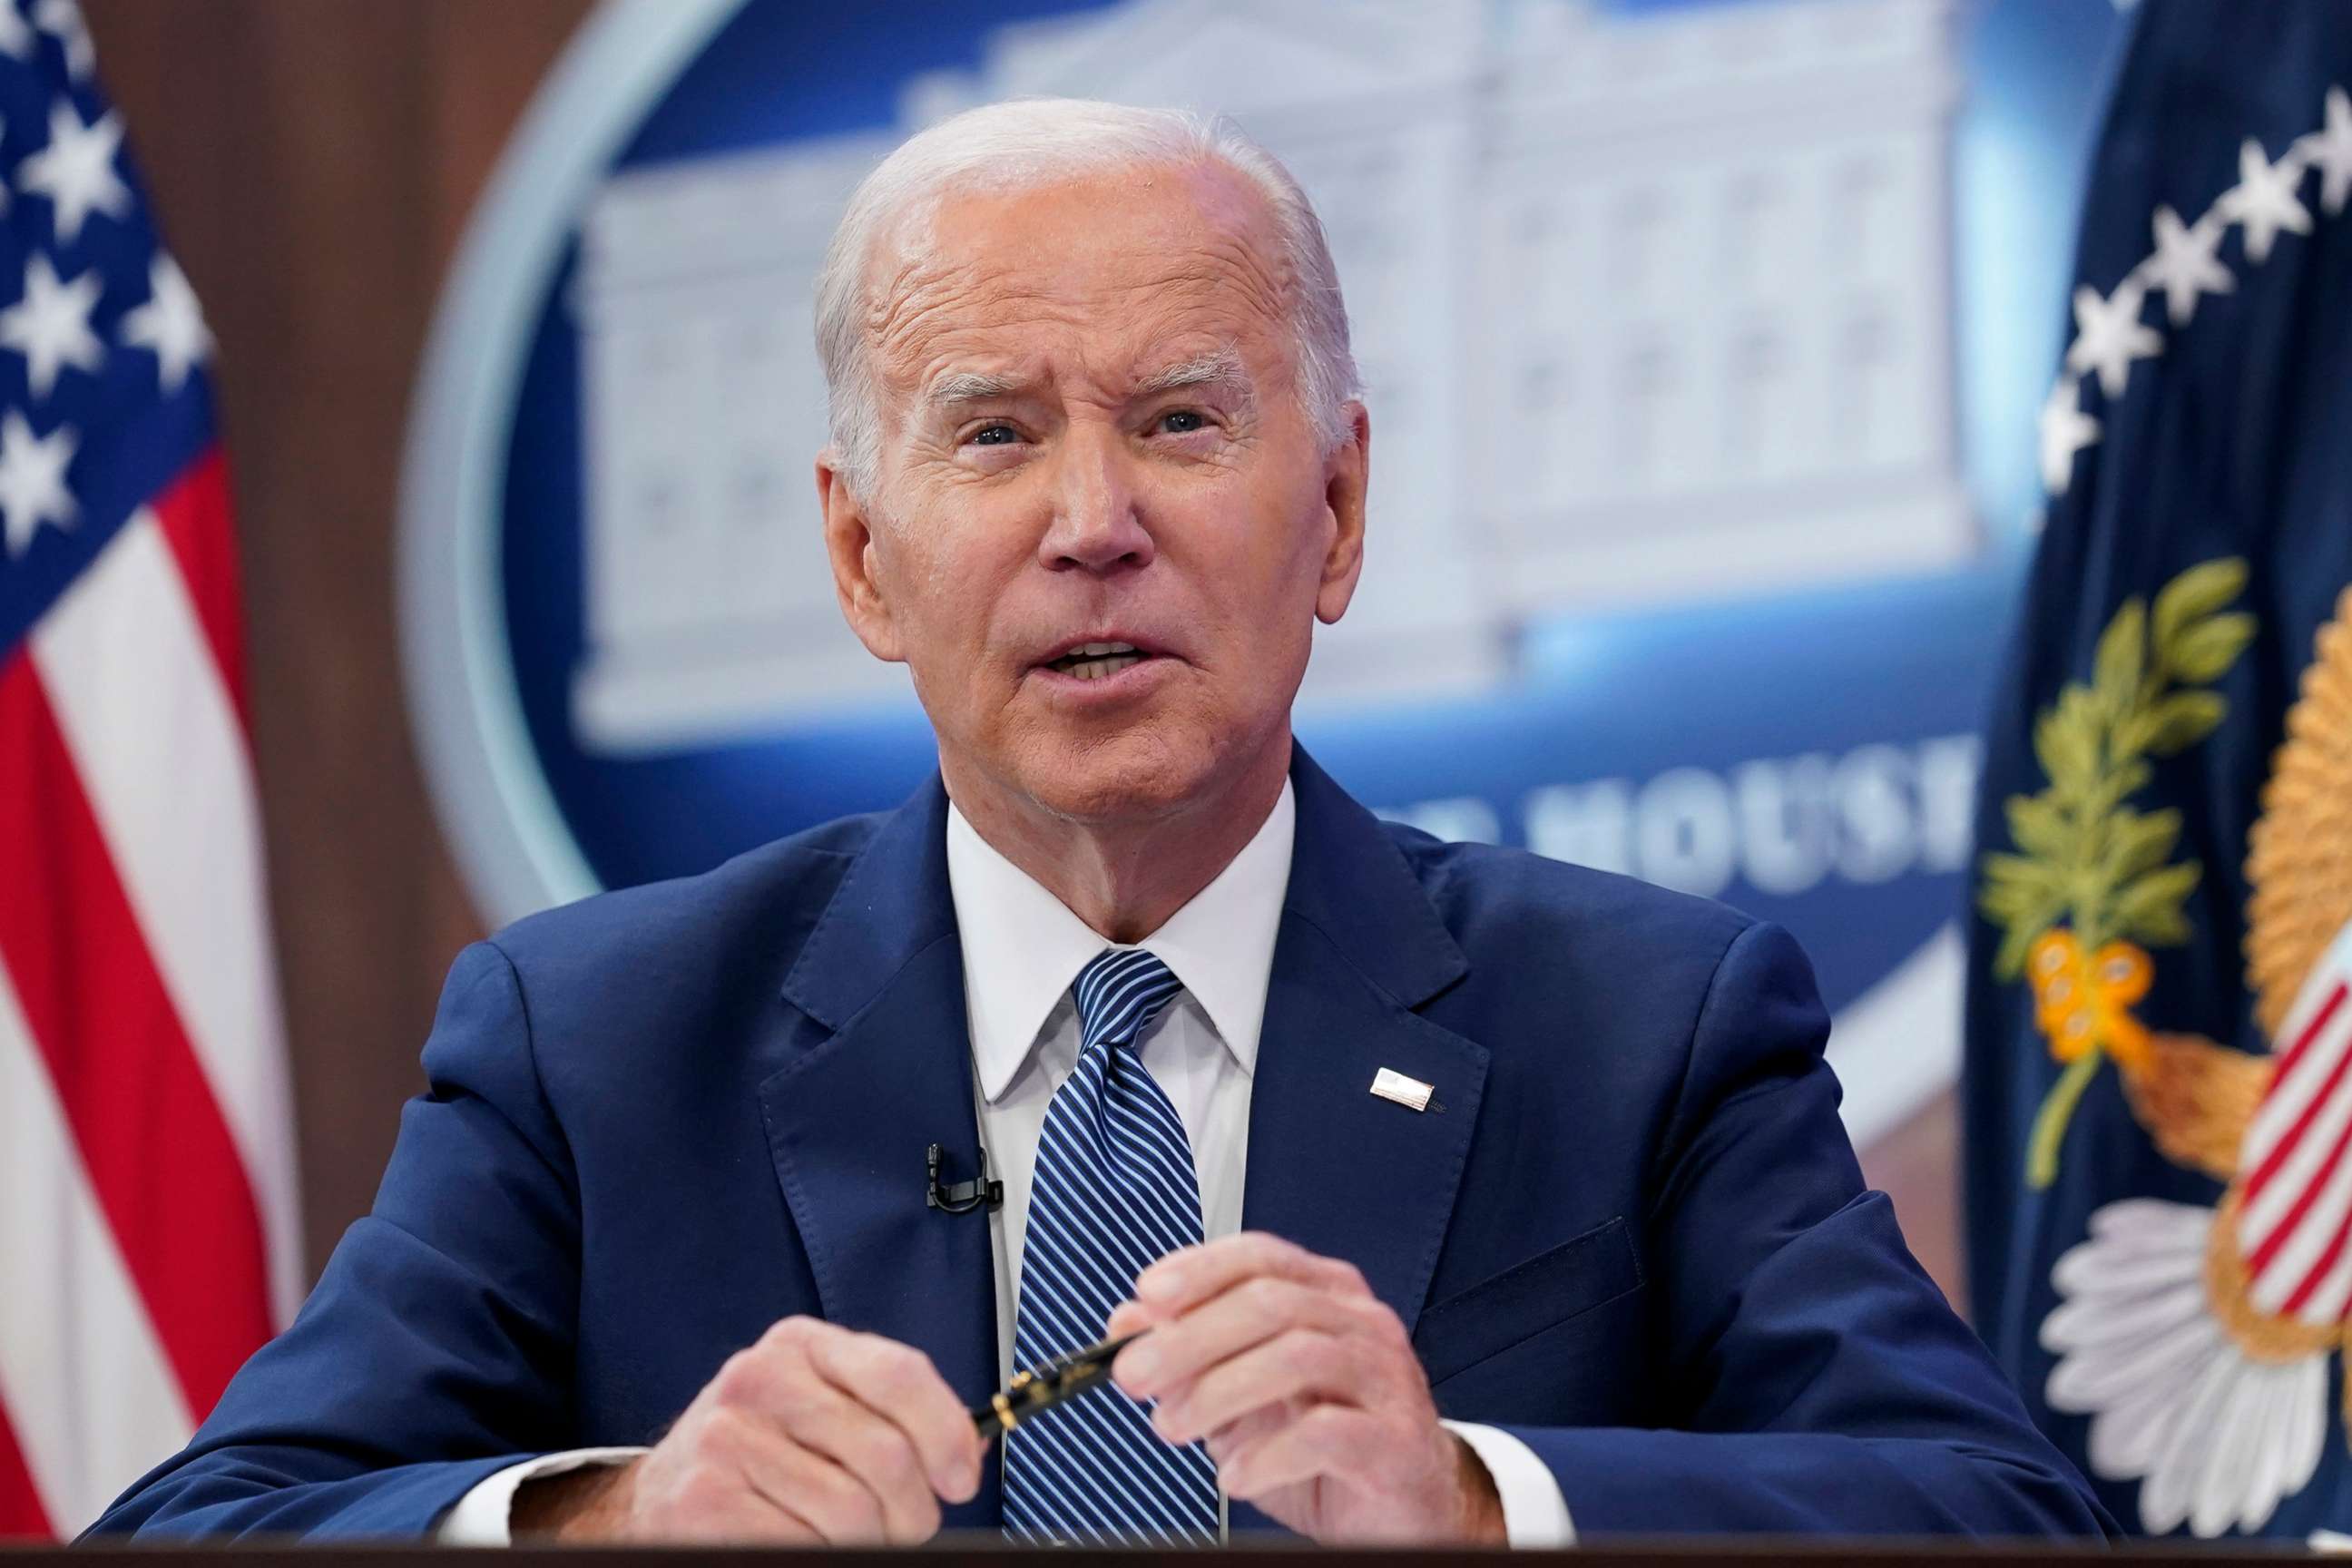 PHOTO: President Joe Biden speaks at the Summit on Fire Prevention and Control in the South Court Auditorium on the White House complex in Washington, D.C., Oct. 11, 2022.